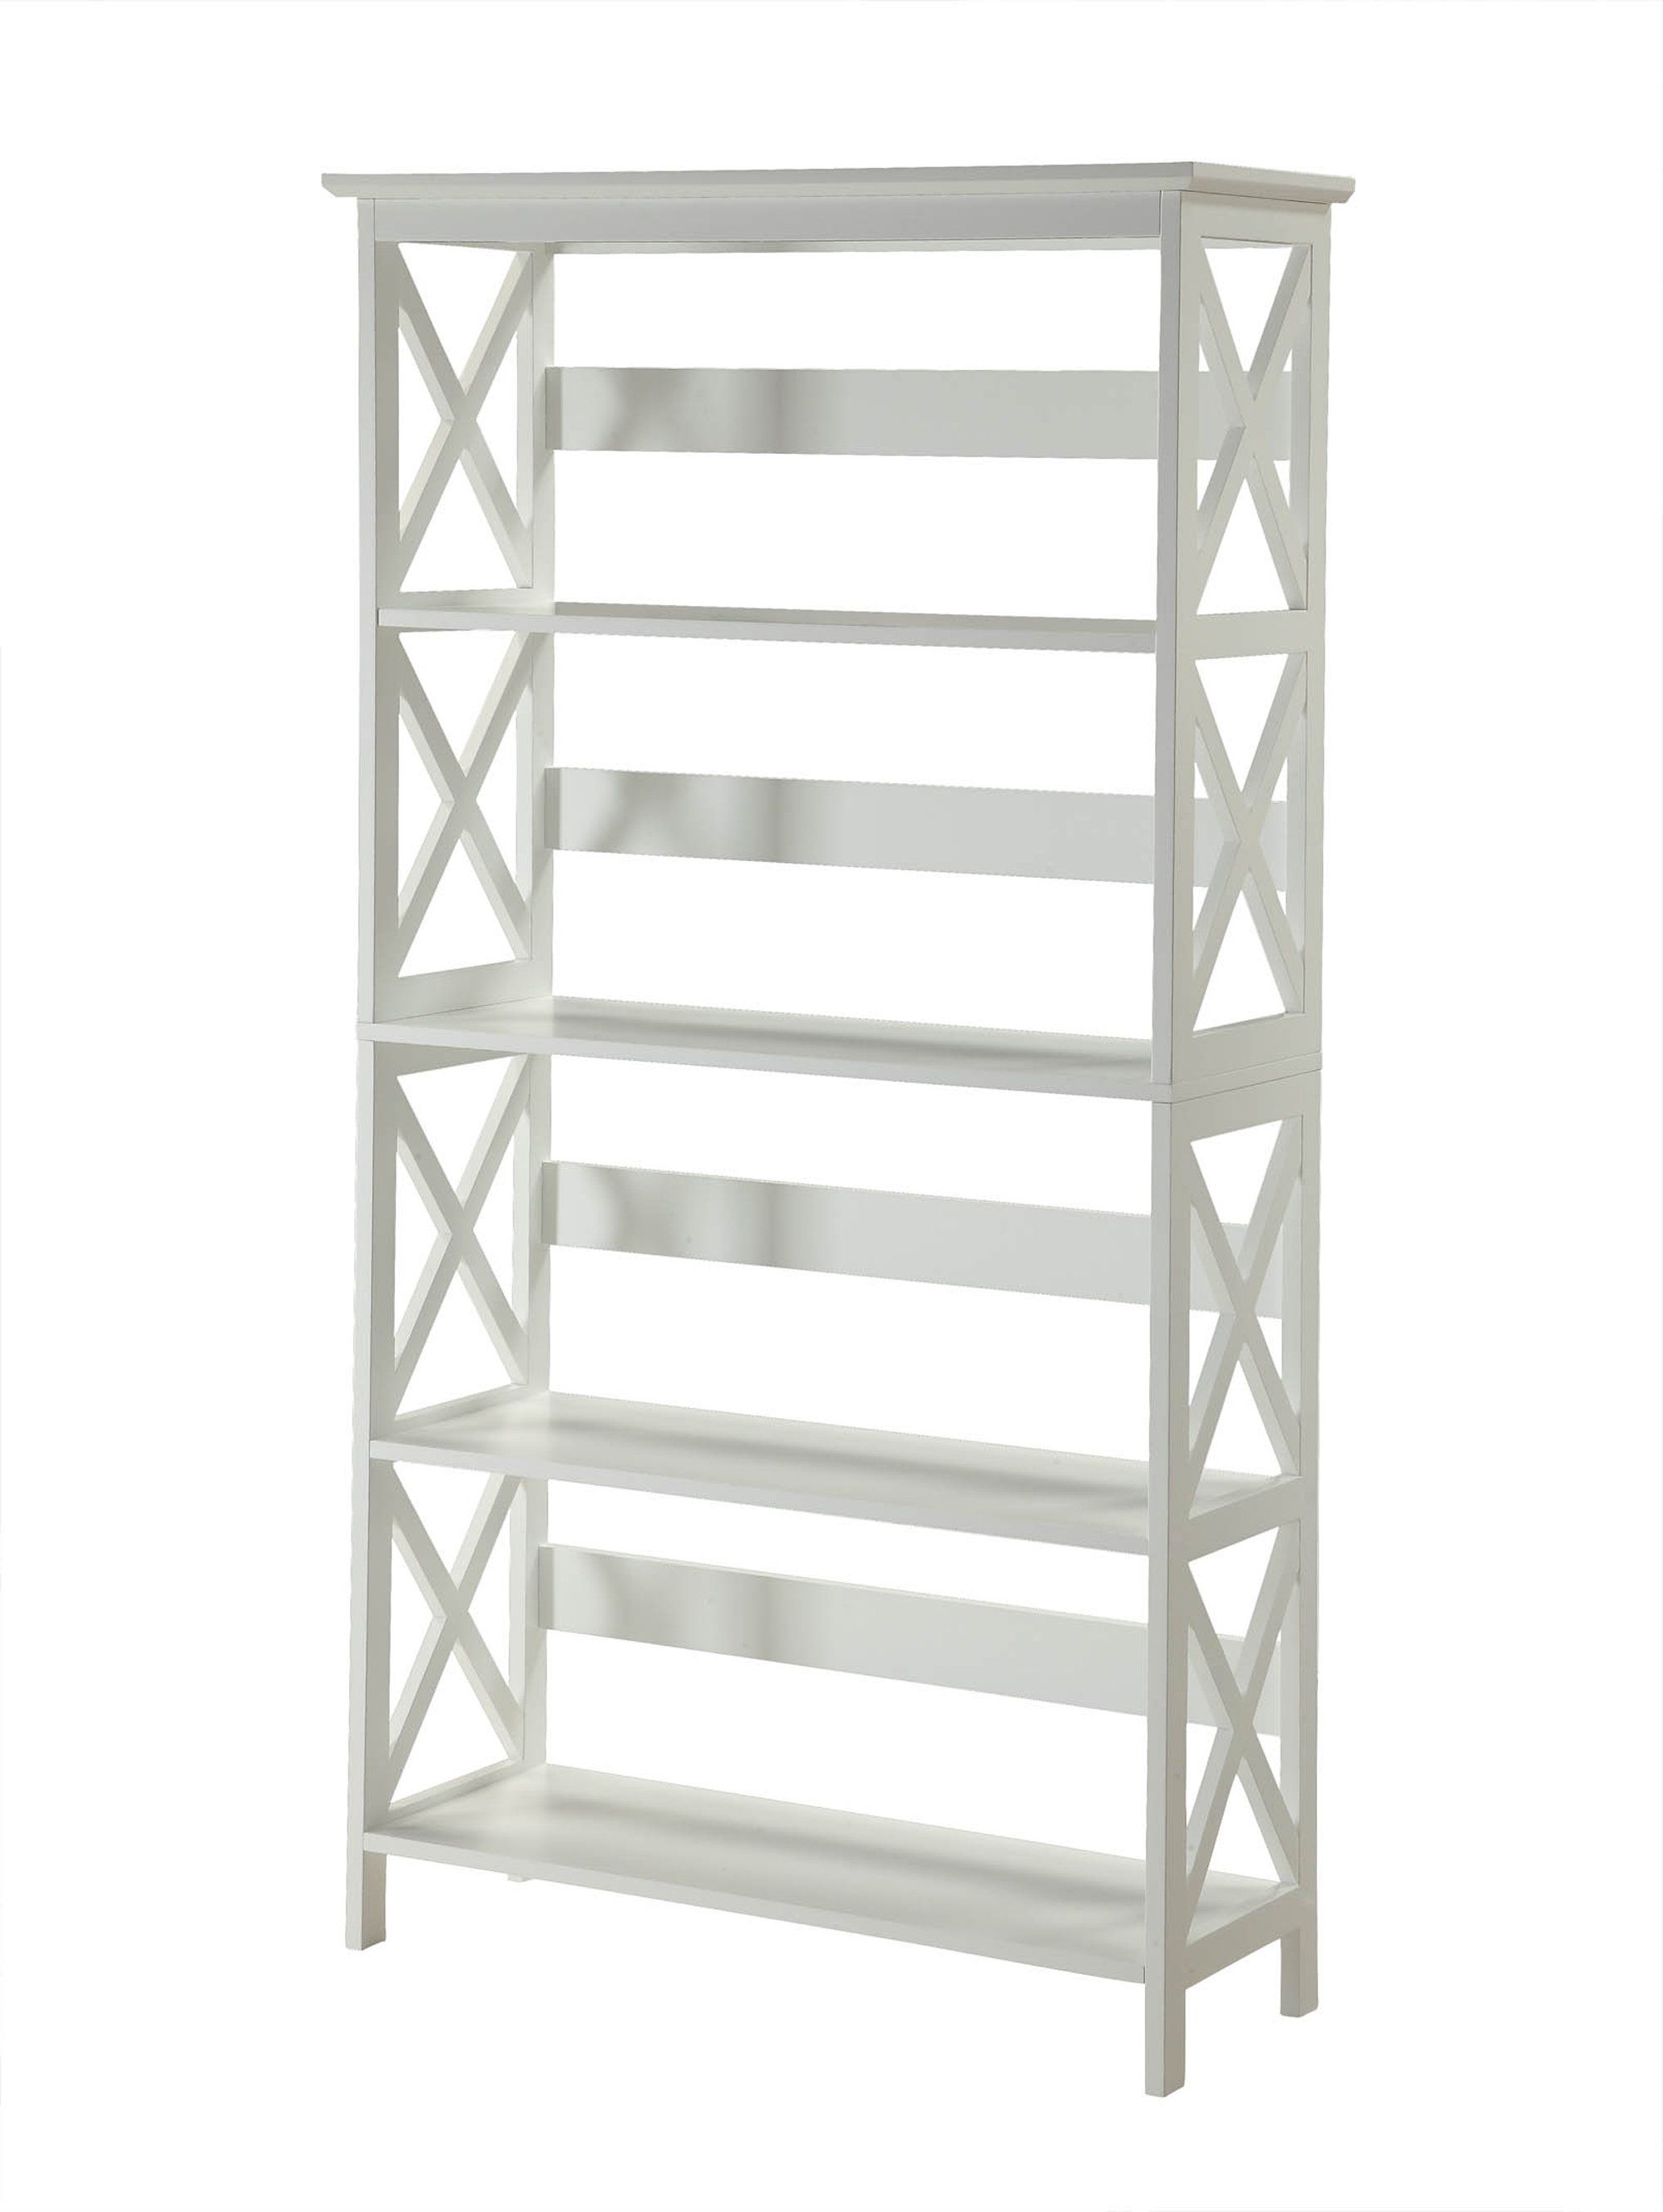 Stoneford Etagere Bookcase In Well Known Stoneford Etagere Bookcases (View 1 of 20)